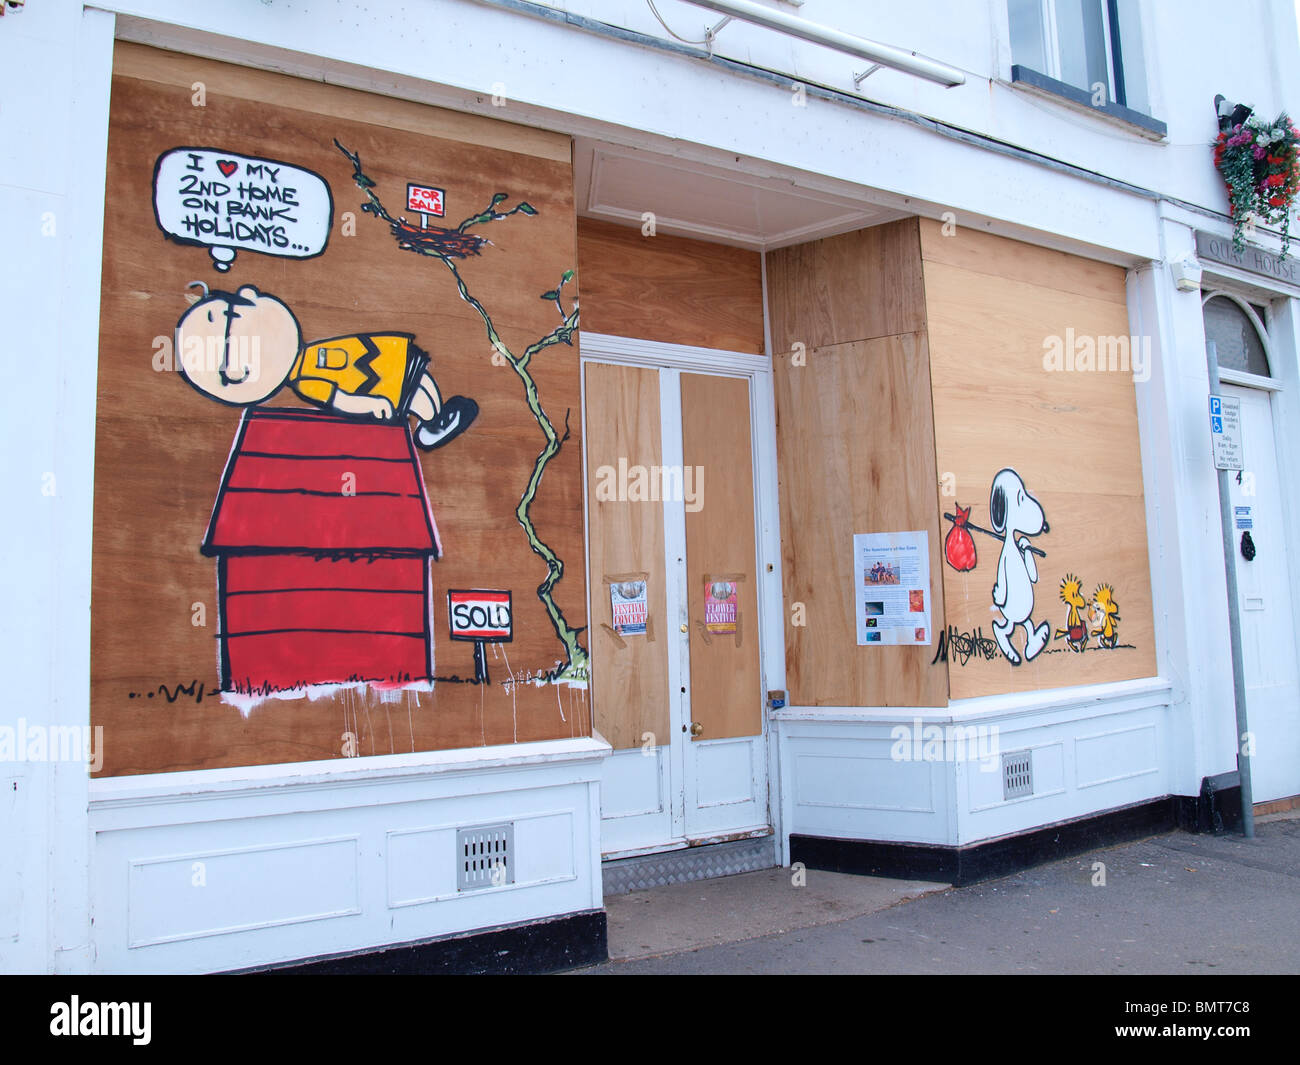 A closed down shop with a graffiti protest against second home owners, Appledore, Devon. Stock Photo